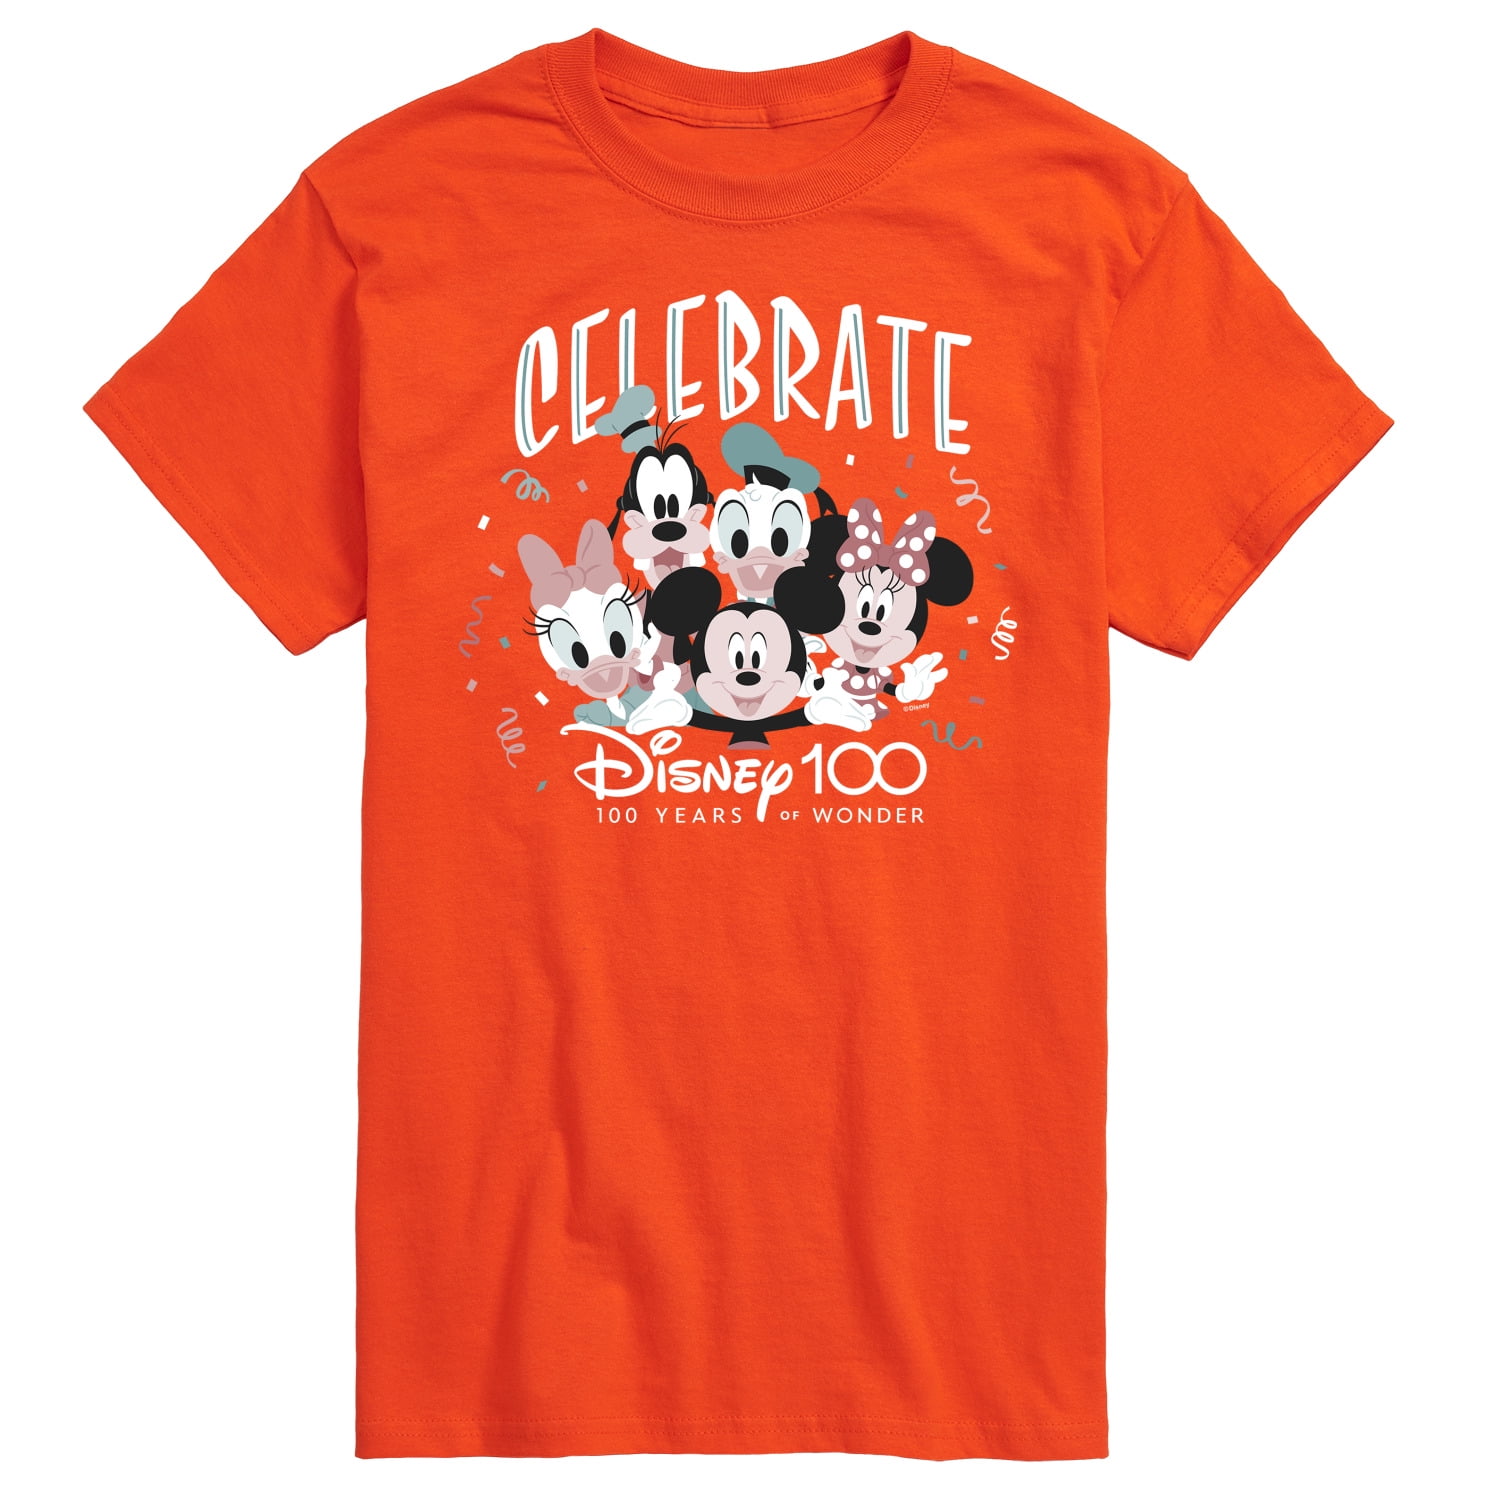 Disney 100 - 100 Years of Wonder - Celebrate Disney 100 - Mickey Mouse  Clubhouse - Men's Short Sleeve Graphic T-Shirt